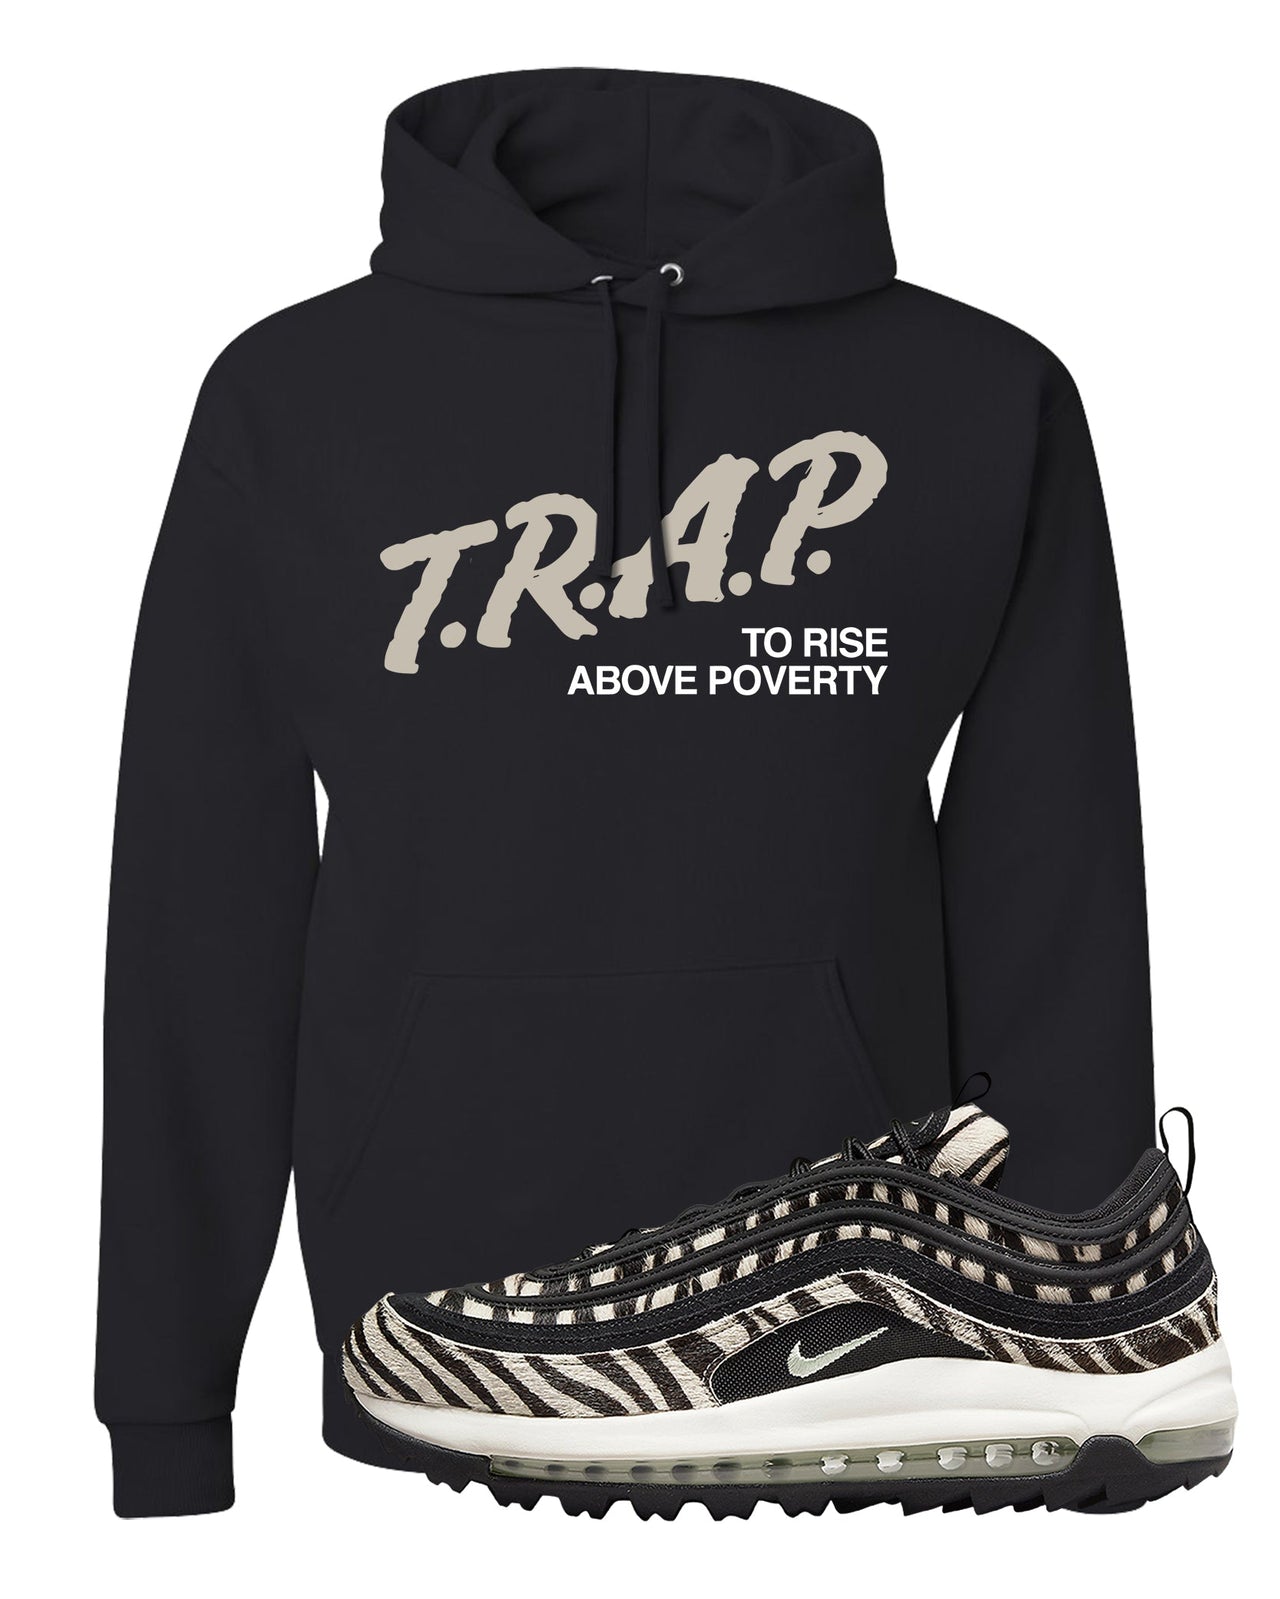 Zebra Golf 97s Hoodie | Trap To Rise Above Poverty, Black